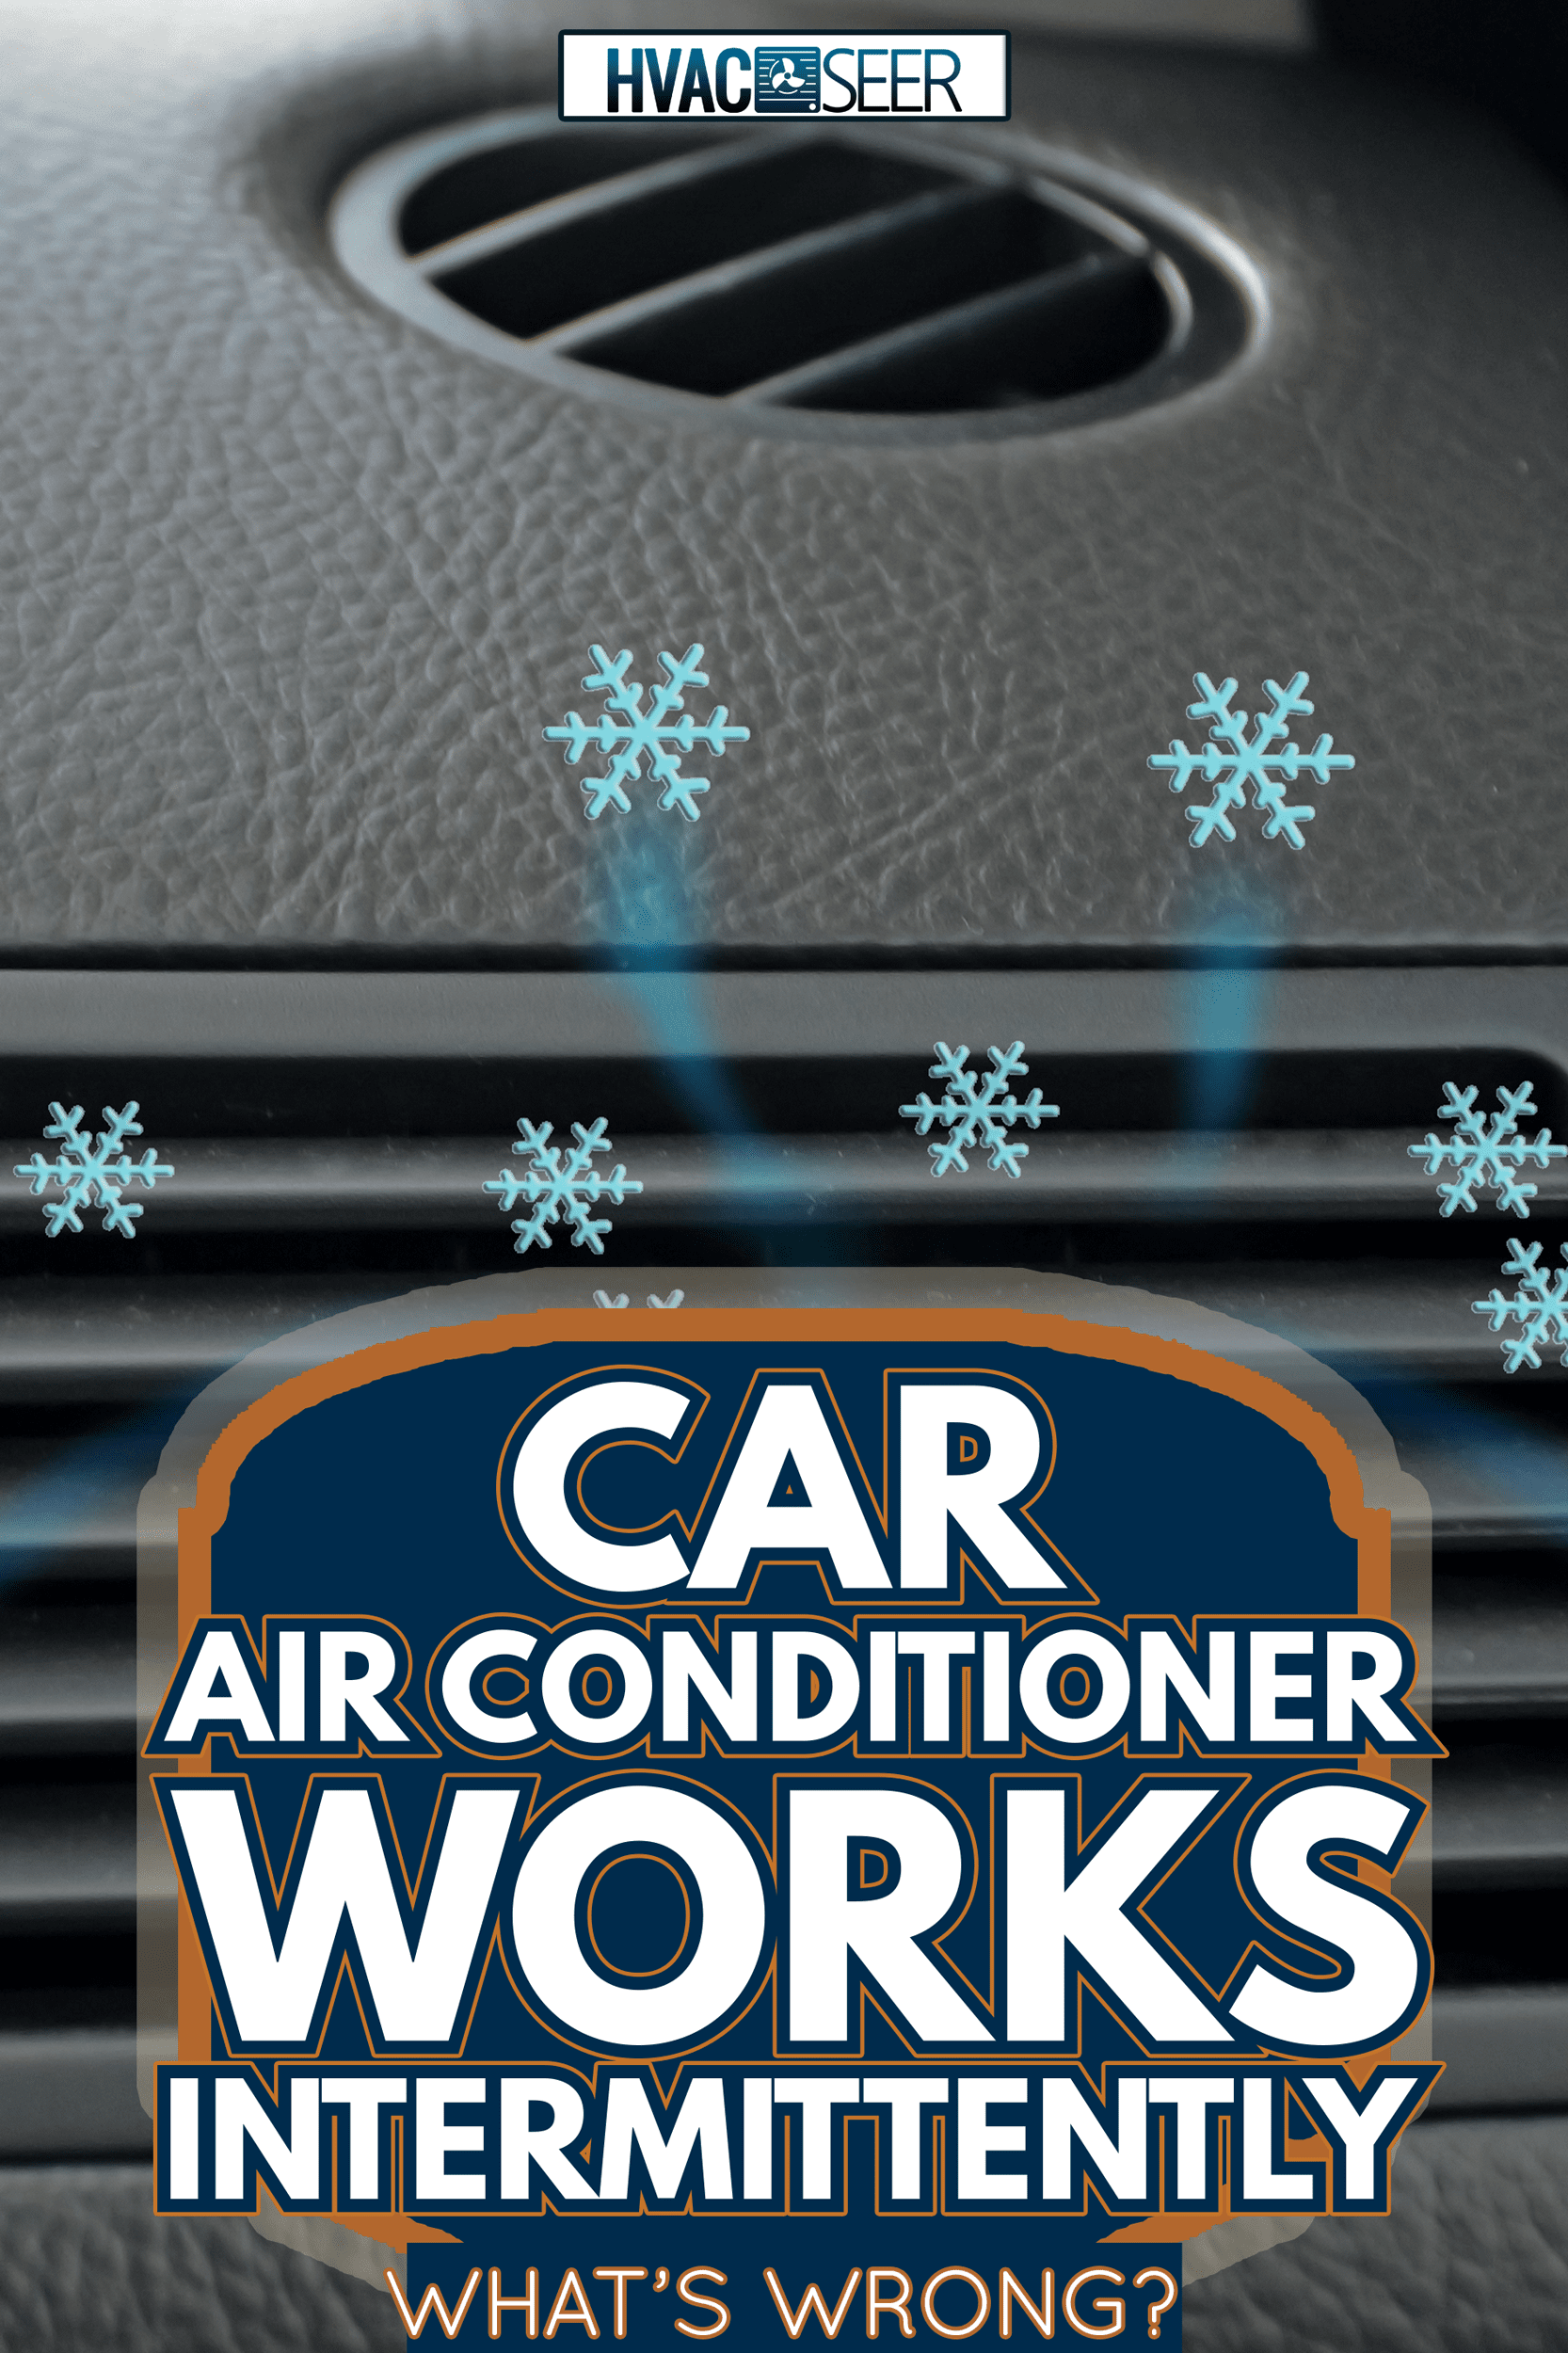 air conditioner air condition car techonolgy cooling snowflakes air flow background - Car Air Conditioner Works Intermittently—What's Wrong